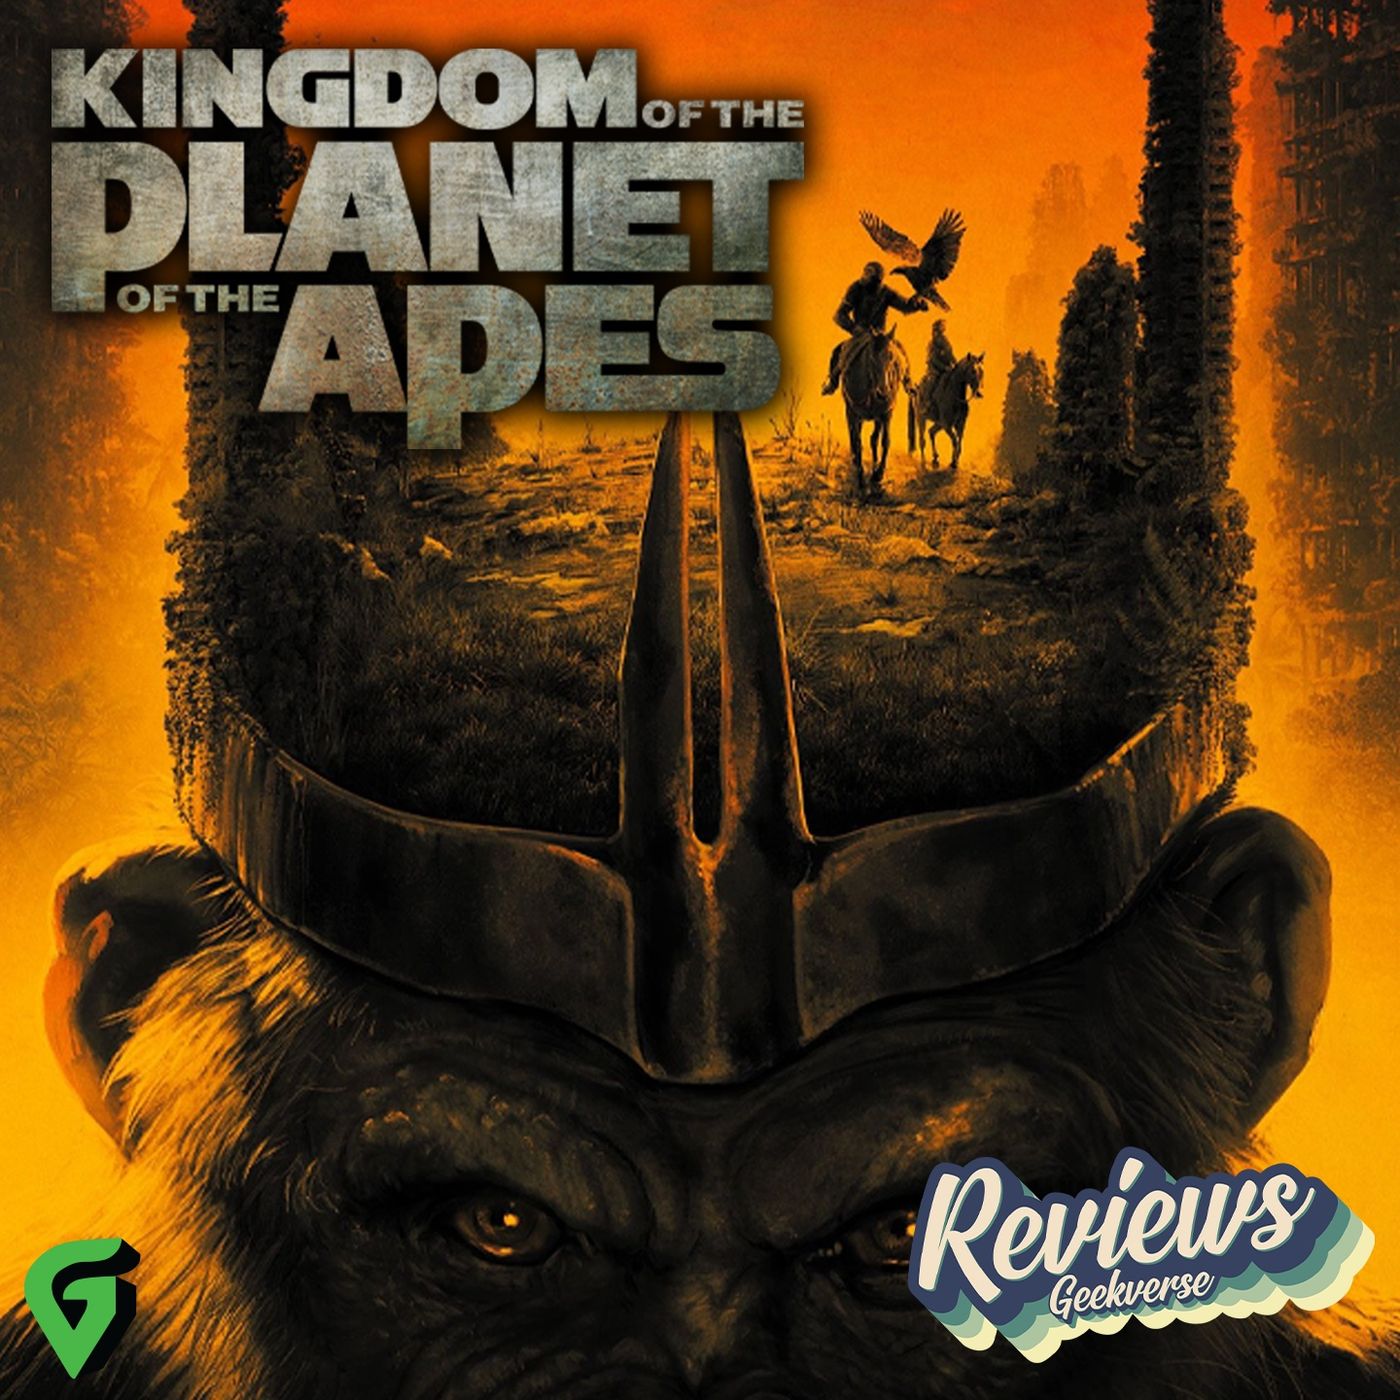 Kingdom Of The Planet Of The Apes Spoilers Review